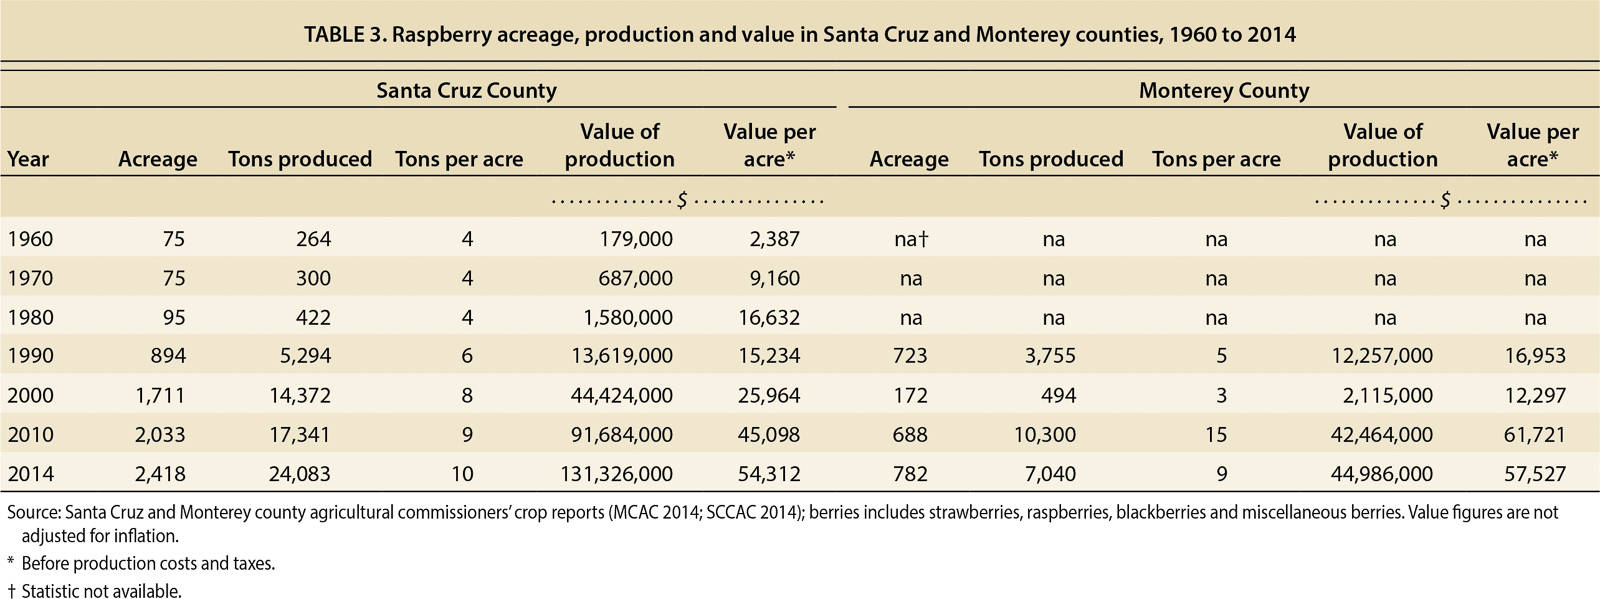 Raspberry acreage, production and value in Santa Cruz and Monterey counties, 1960 to 2014